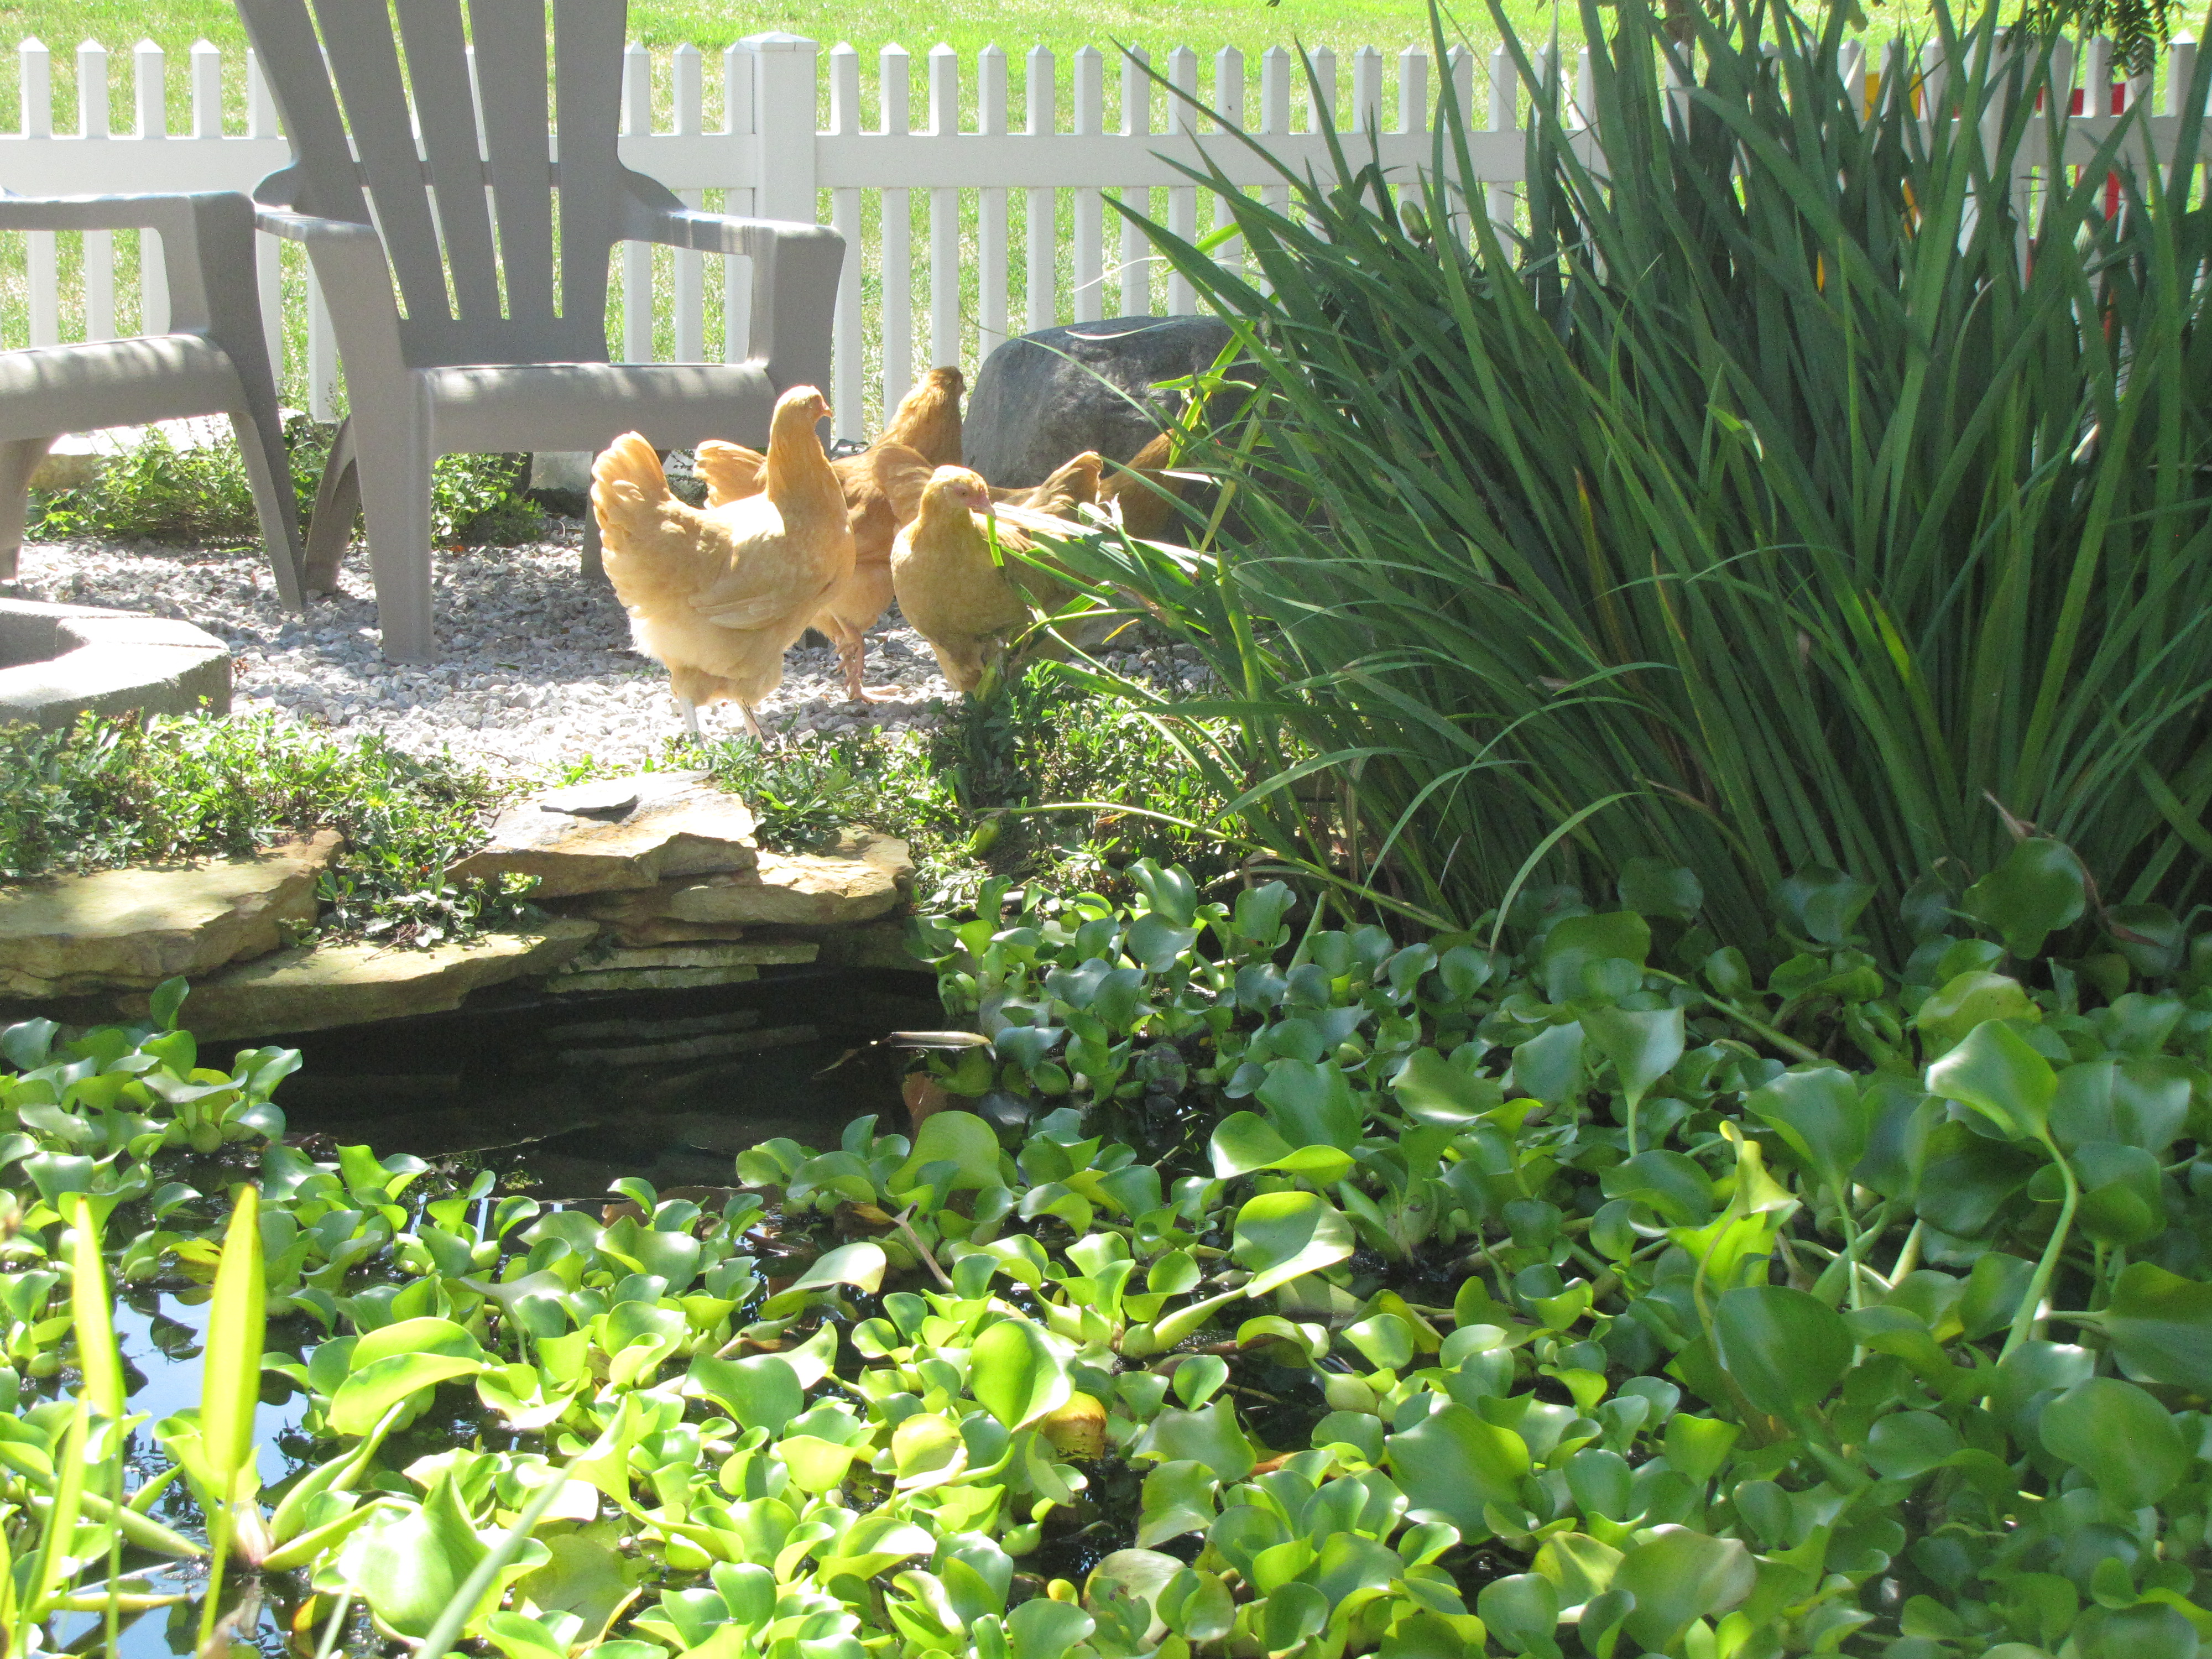 The ladies have discovered the fish pond.